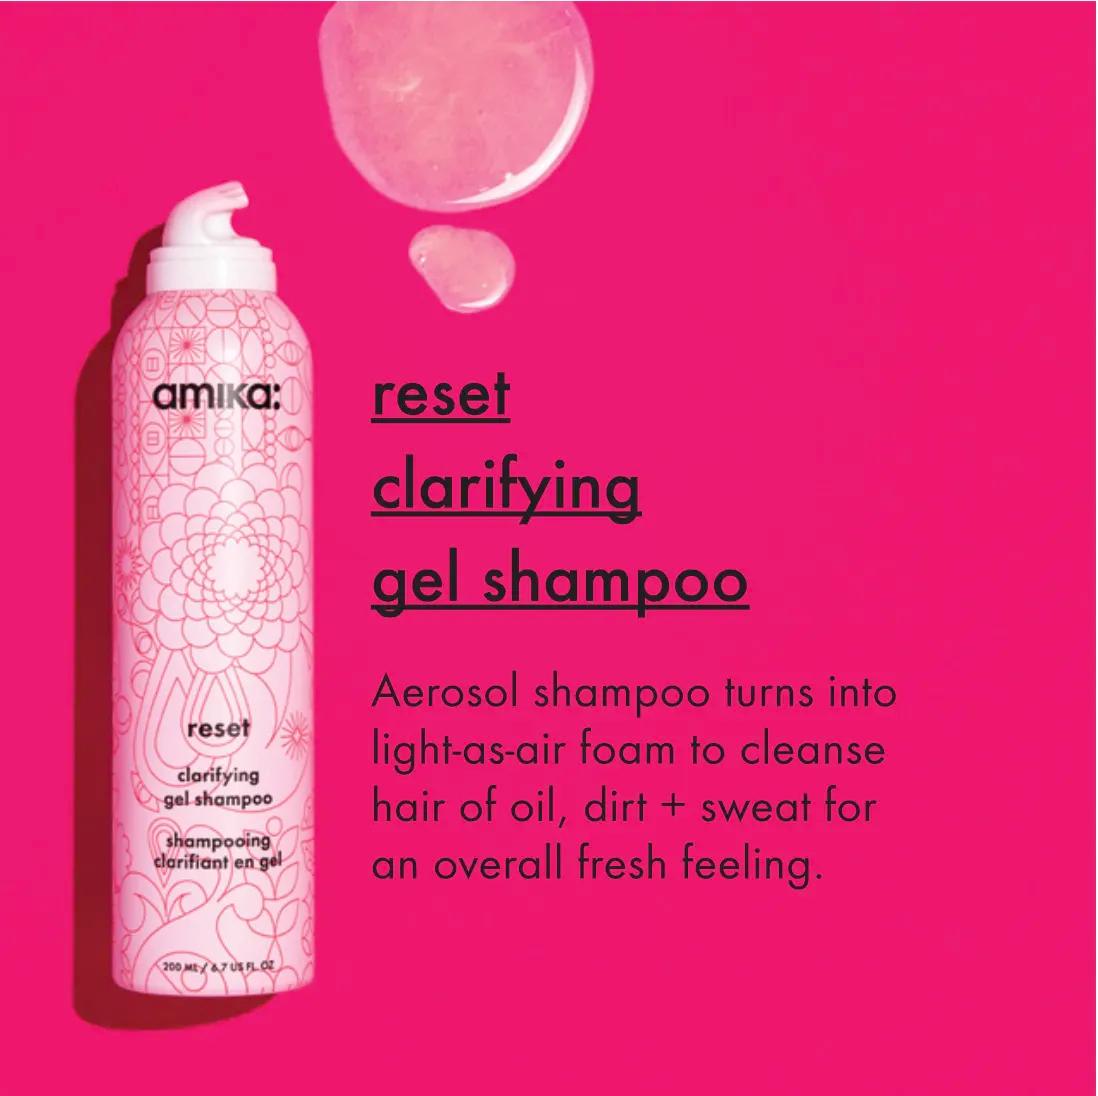 reset clarifying gel shampoo: aerosol shampoo turns into light-as-air foam to cleanse hair of oil, dirt + sweat for an overall fresh feeling.